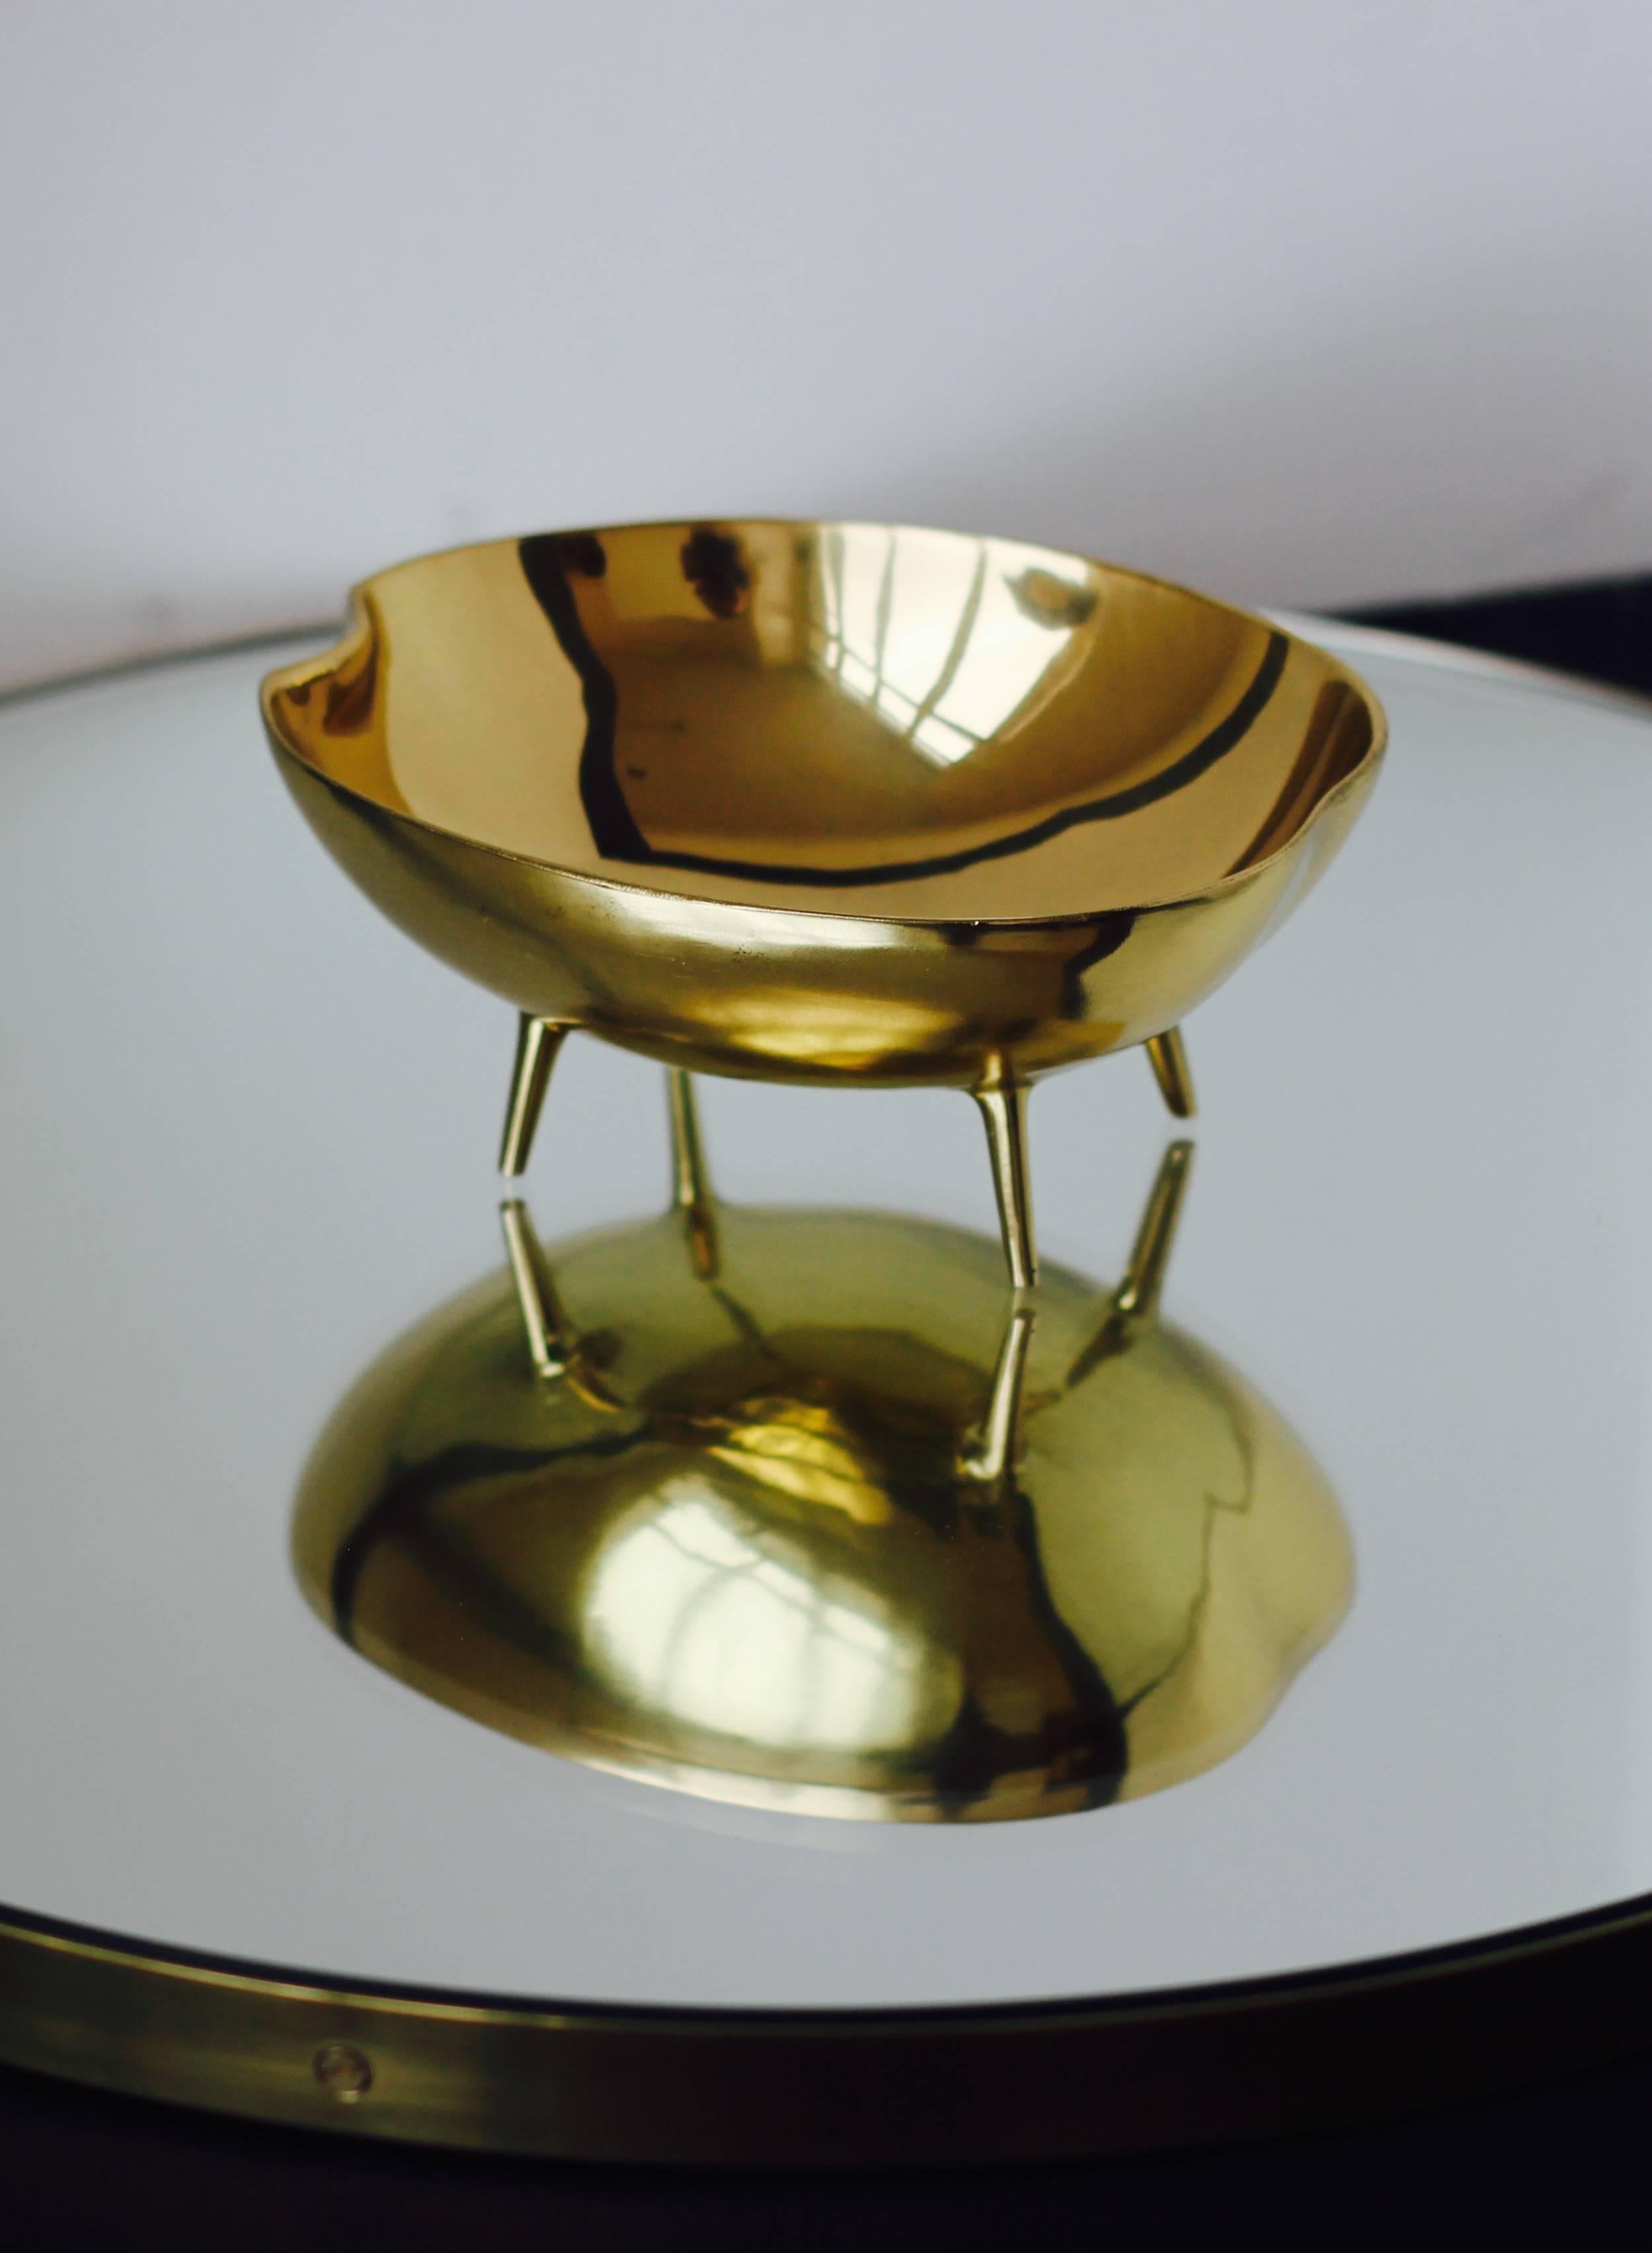 Charming and unusual handmade polished cast brass bowl.

Each of those original and elegant bowls are handmade individually. Cast using very traditional techniques.

Slight variations in polished finishes, patterns and sizes are characteristics